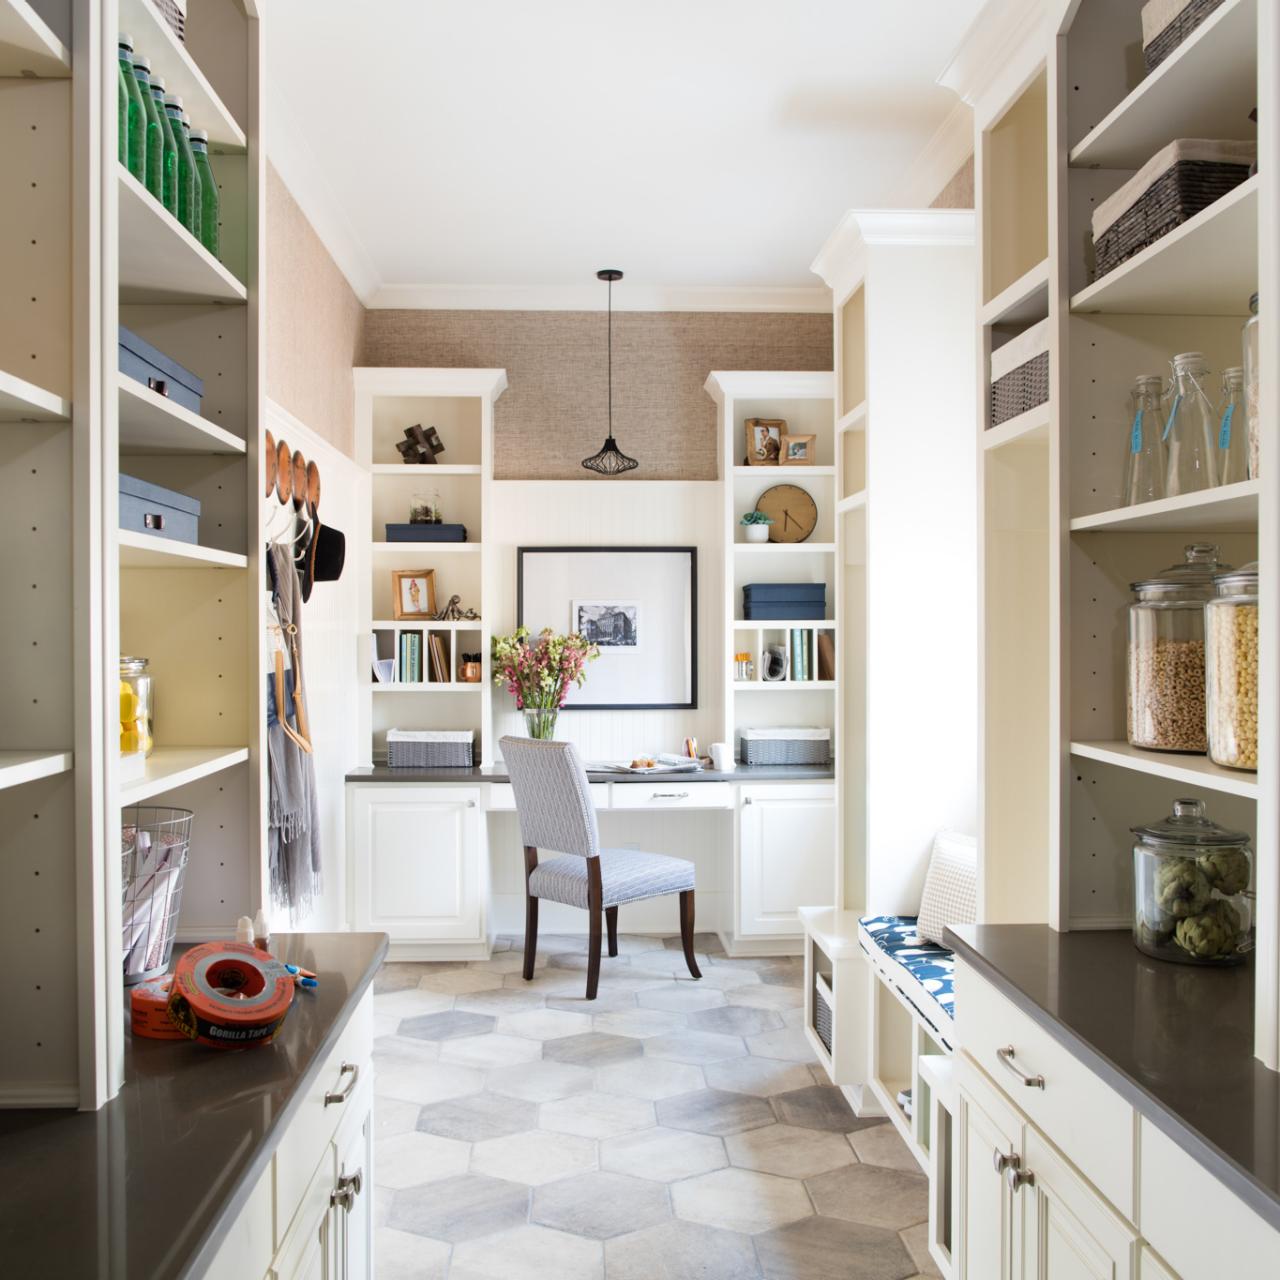 Savvy Food Storage Solutions for Your Kitchen  Kitchen cabinet storage,  Kitchen interior, Kitchen furniture design